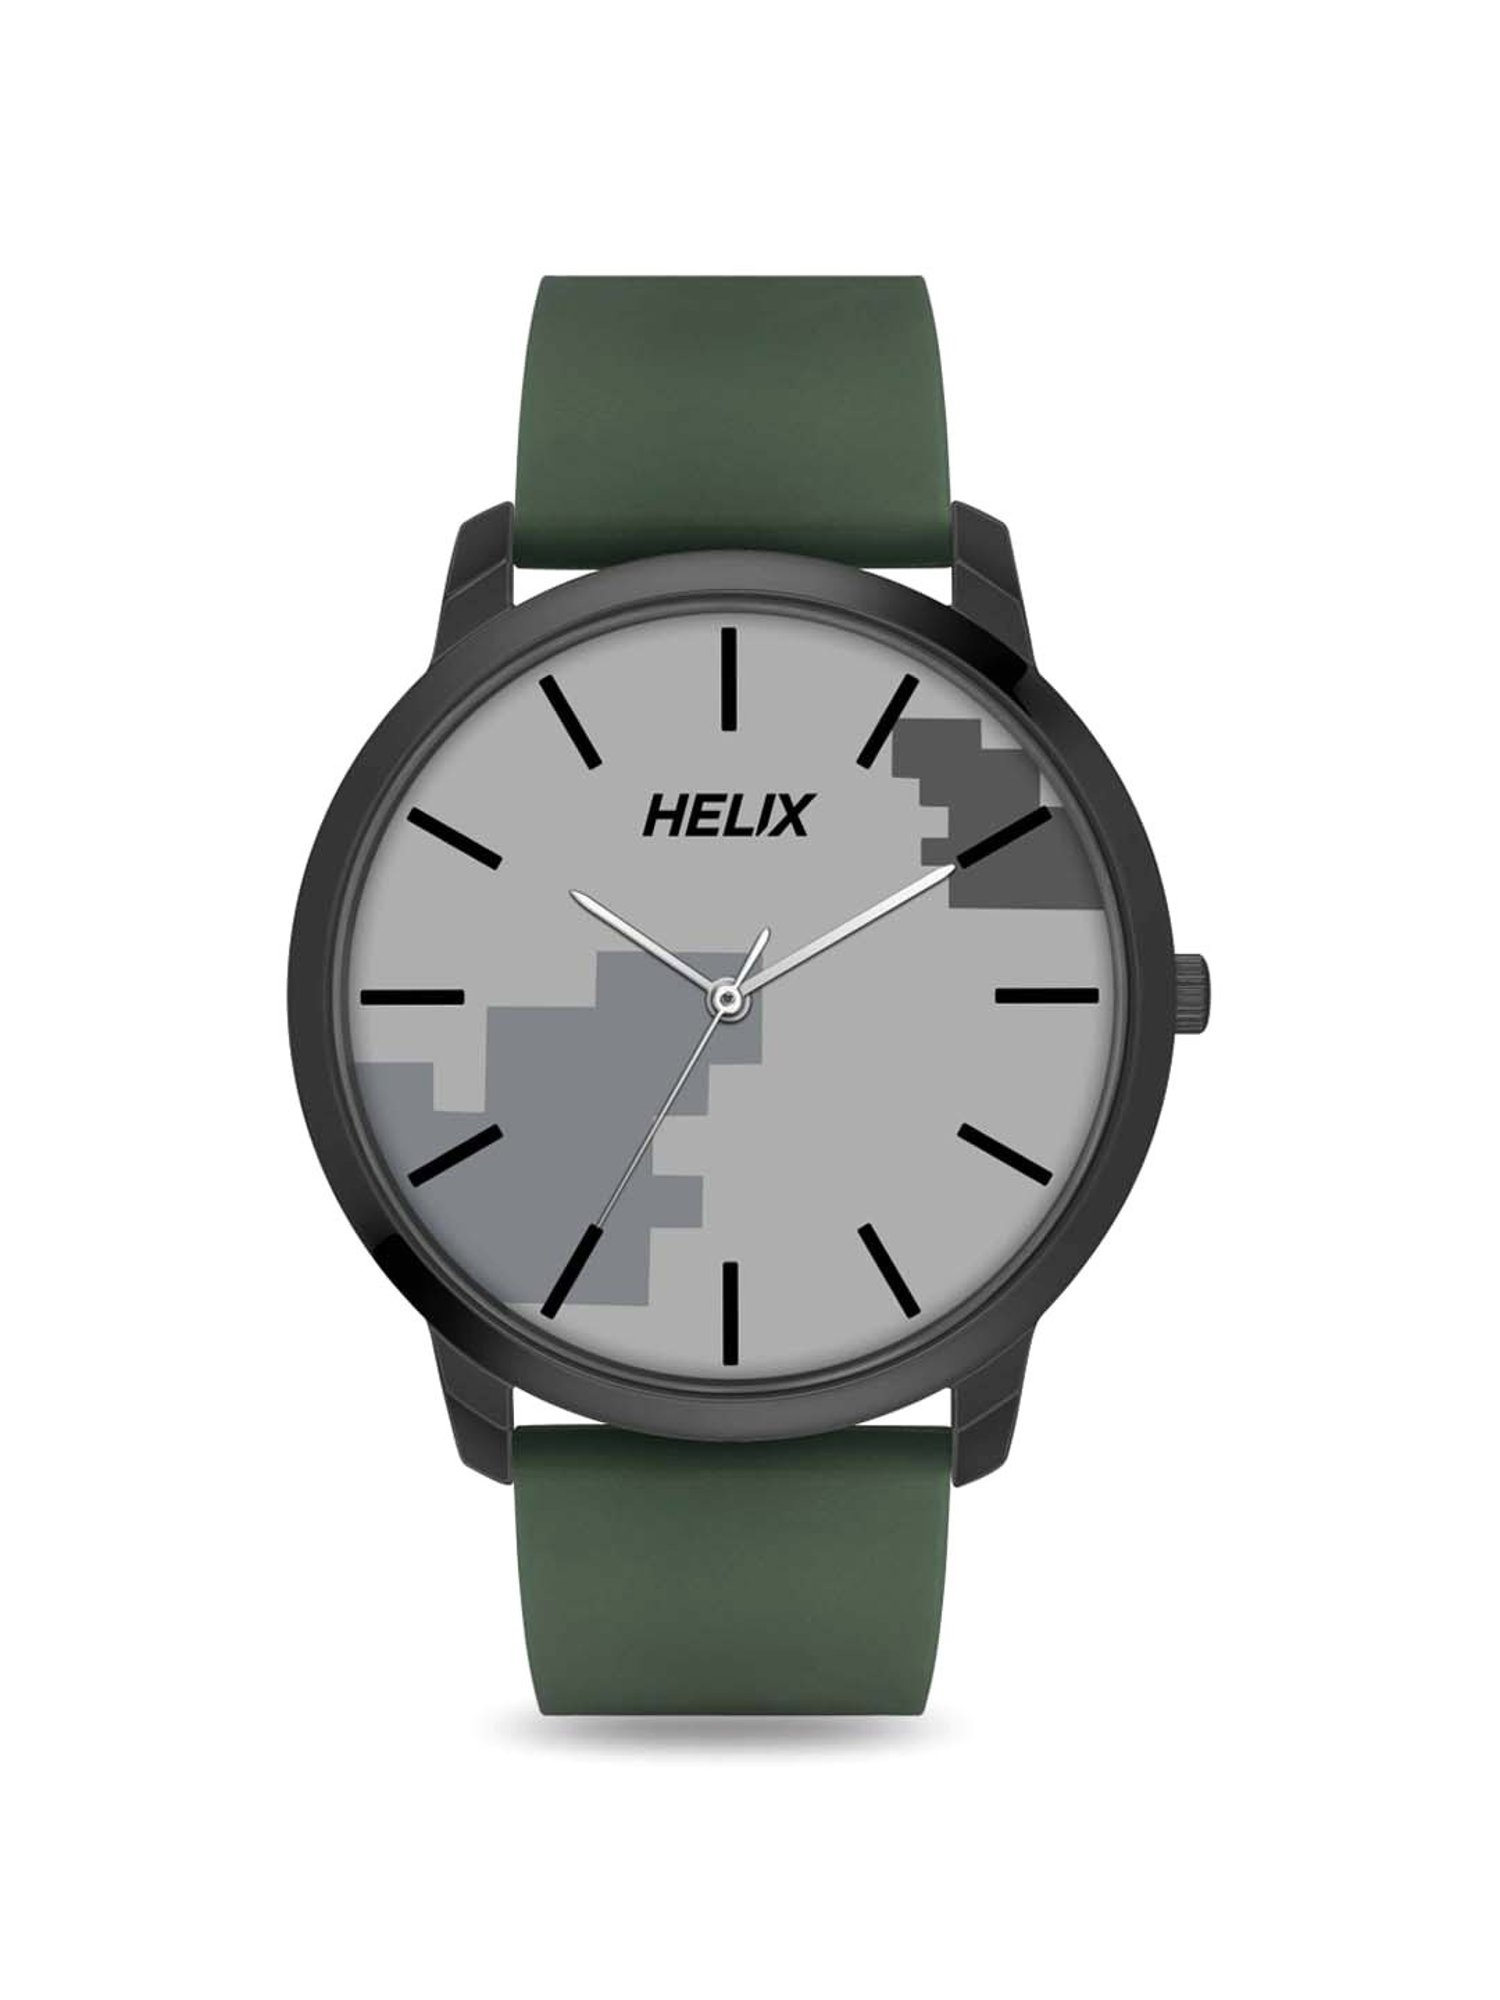 Buy Helix TW039HG14 Analog Watch for Men at Best Price @ Tata CLiQ